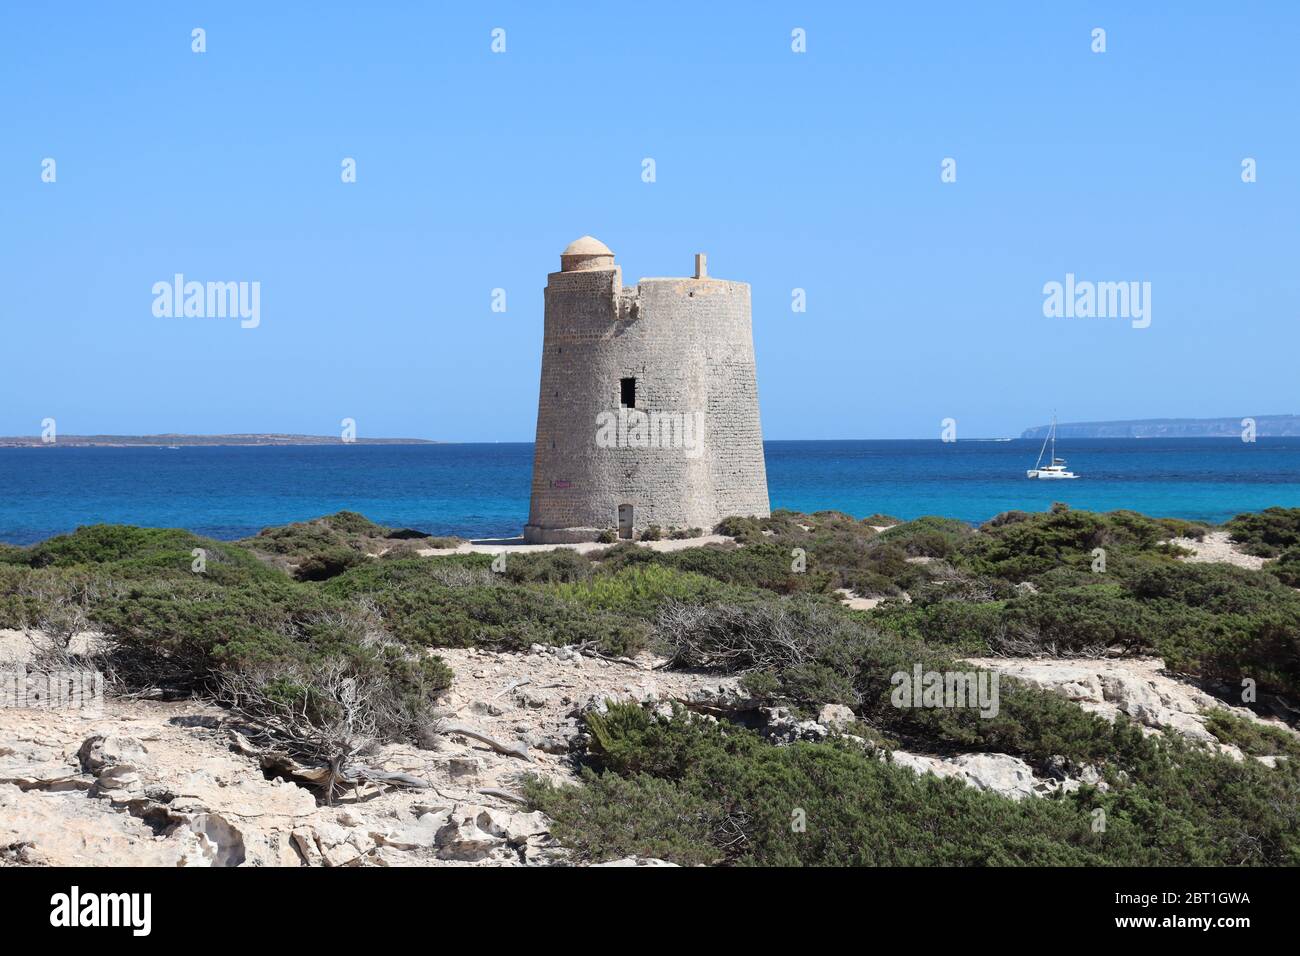 View of construction in Ibiza island Stock Photo